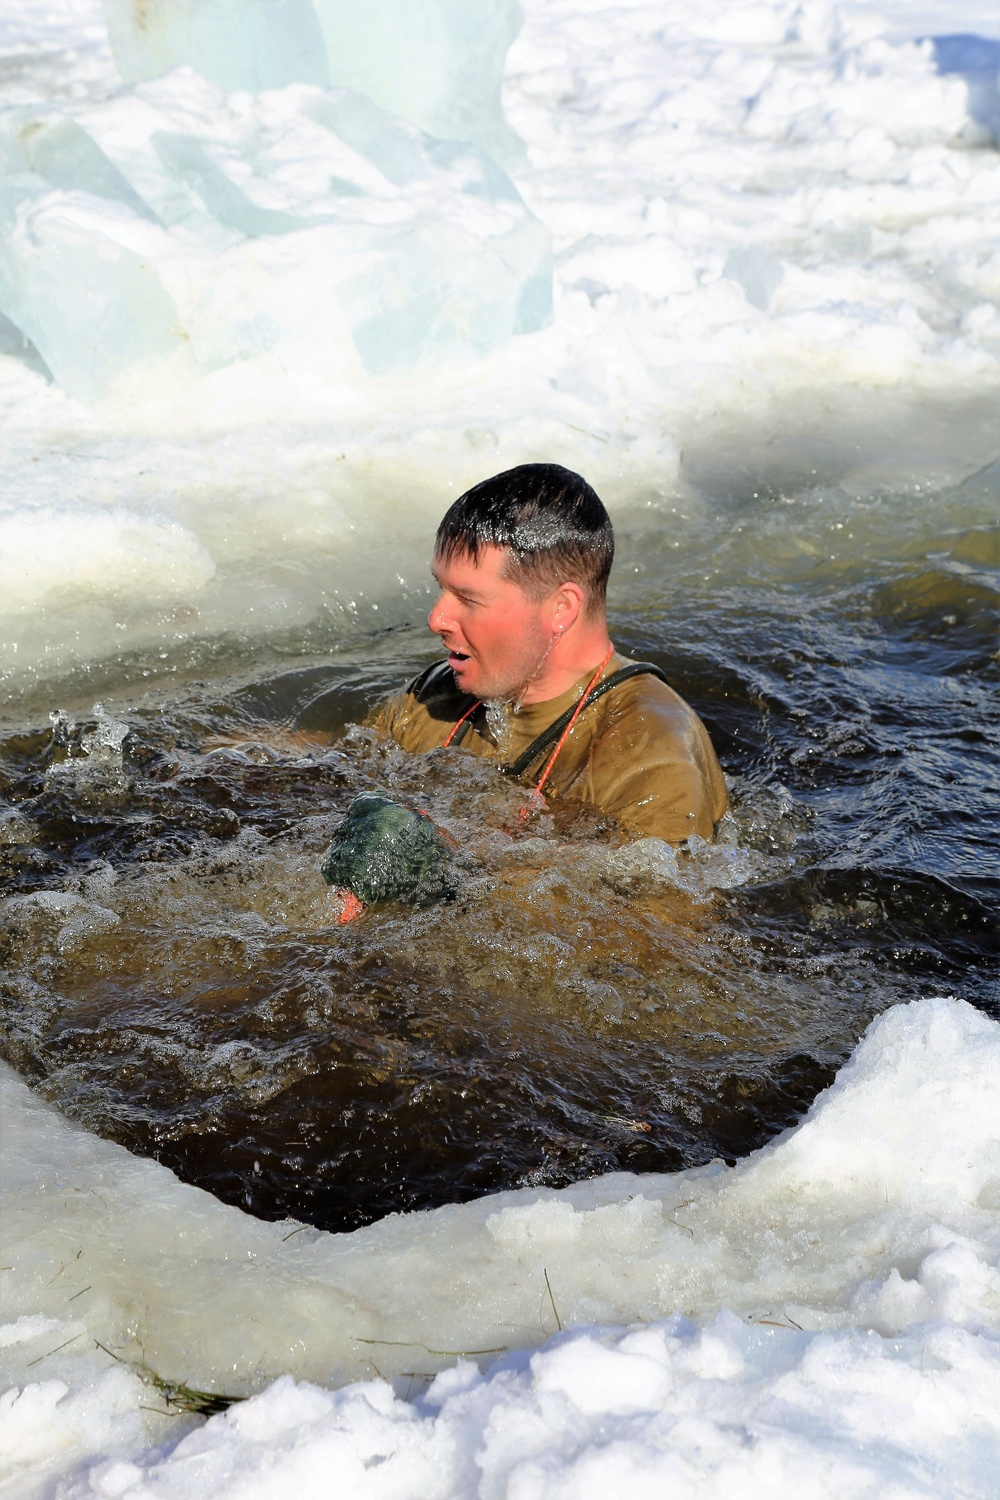 Cold-Weather Operations Course Class 18-04 students complete cold-water immersion training at Fort McCoy